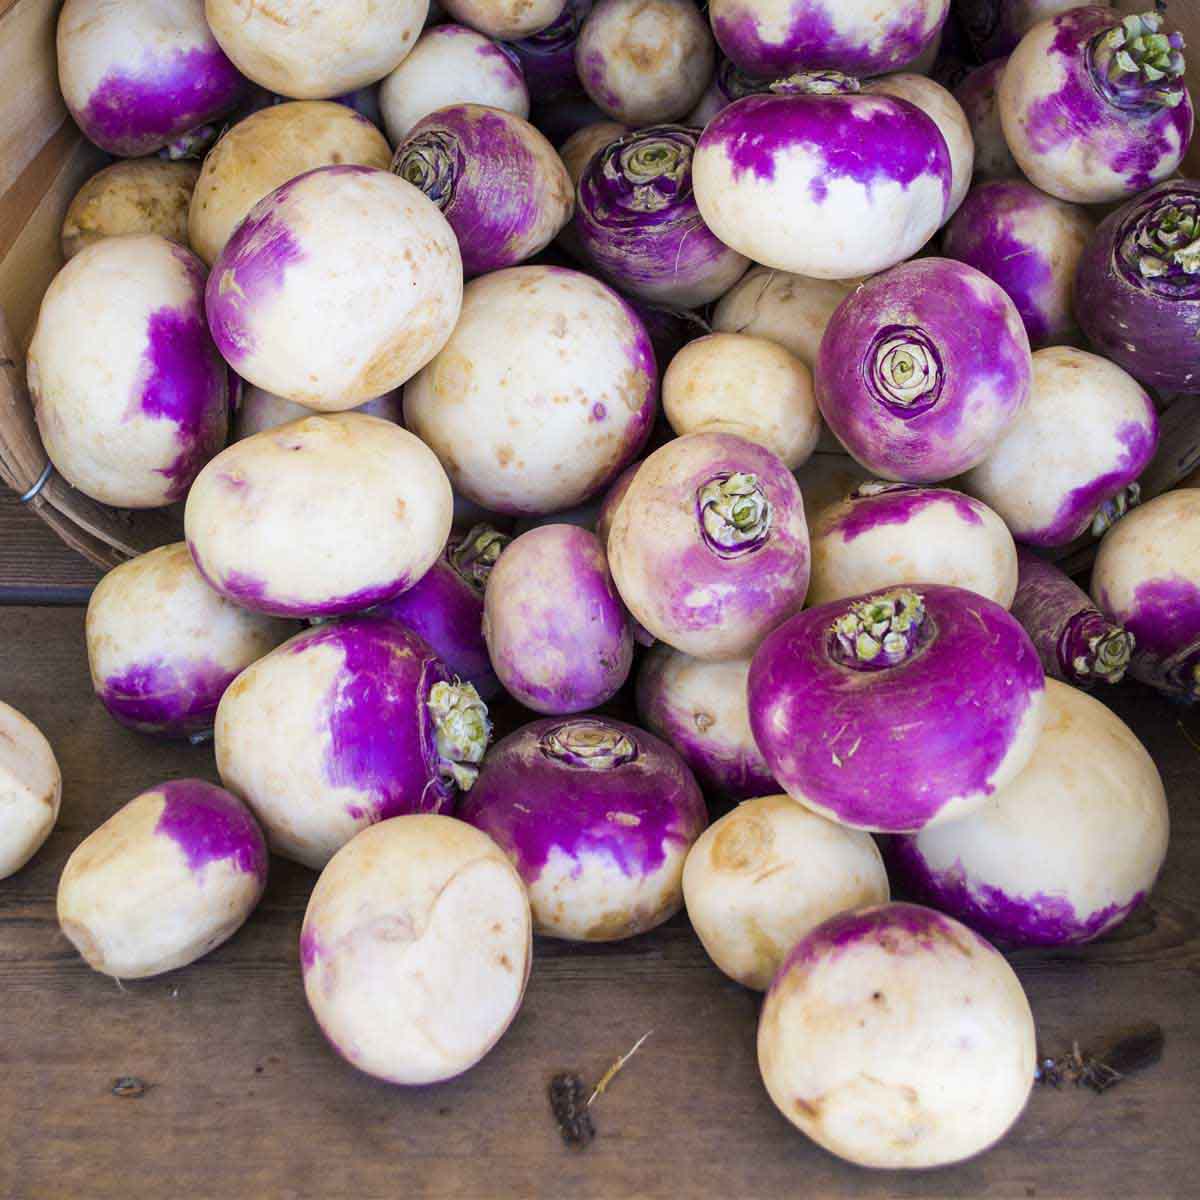 Pile of pink and white turnips.